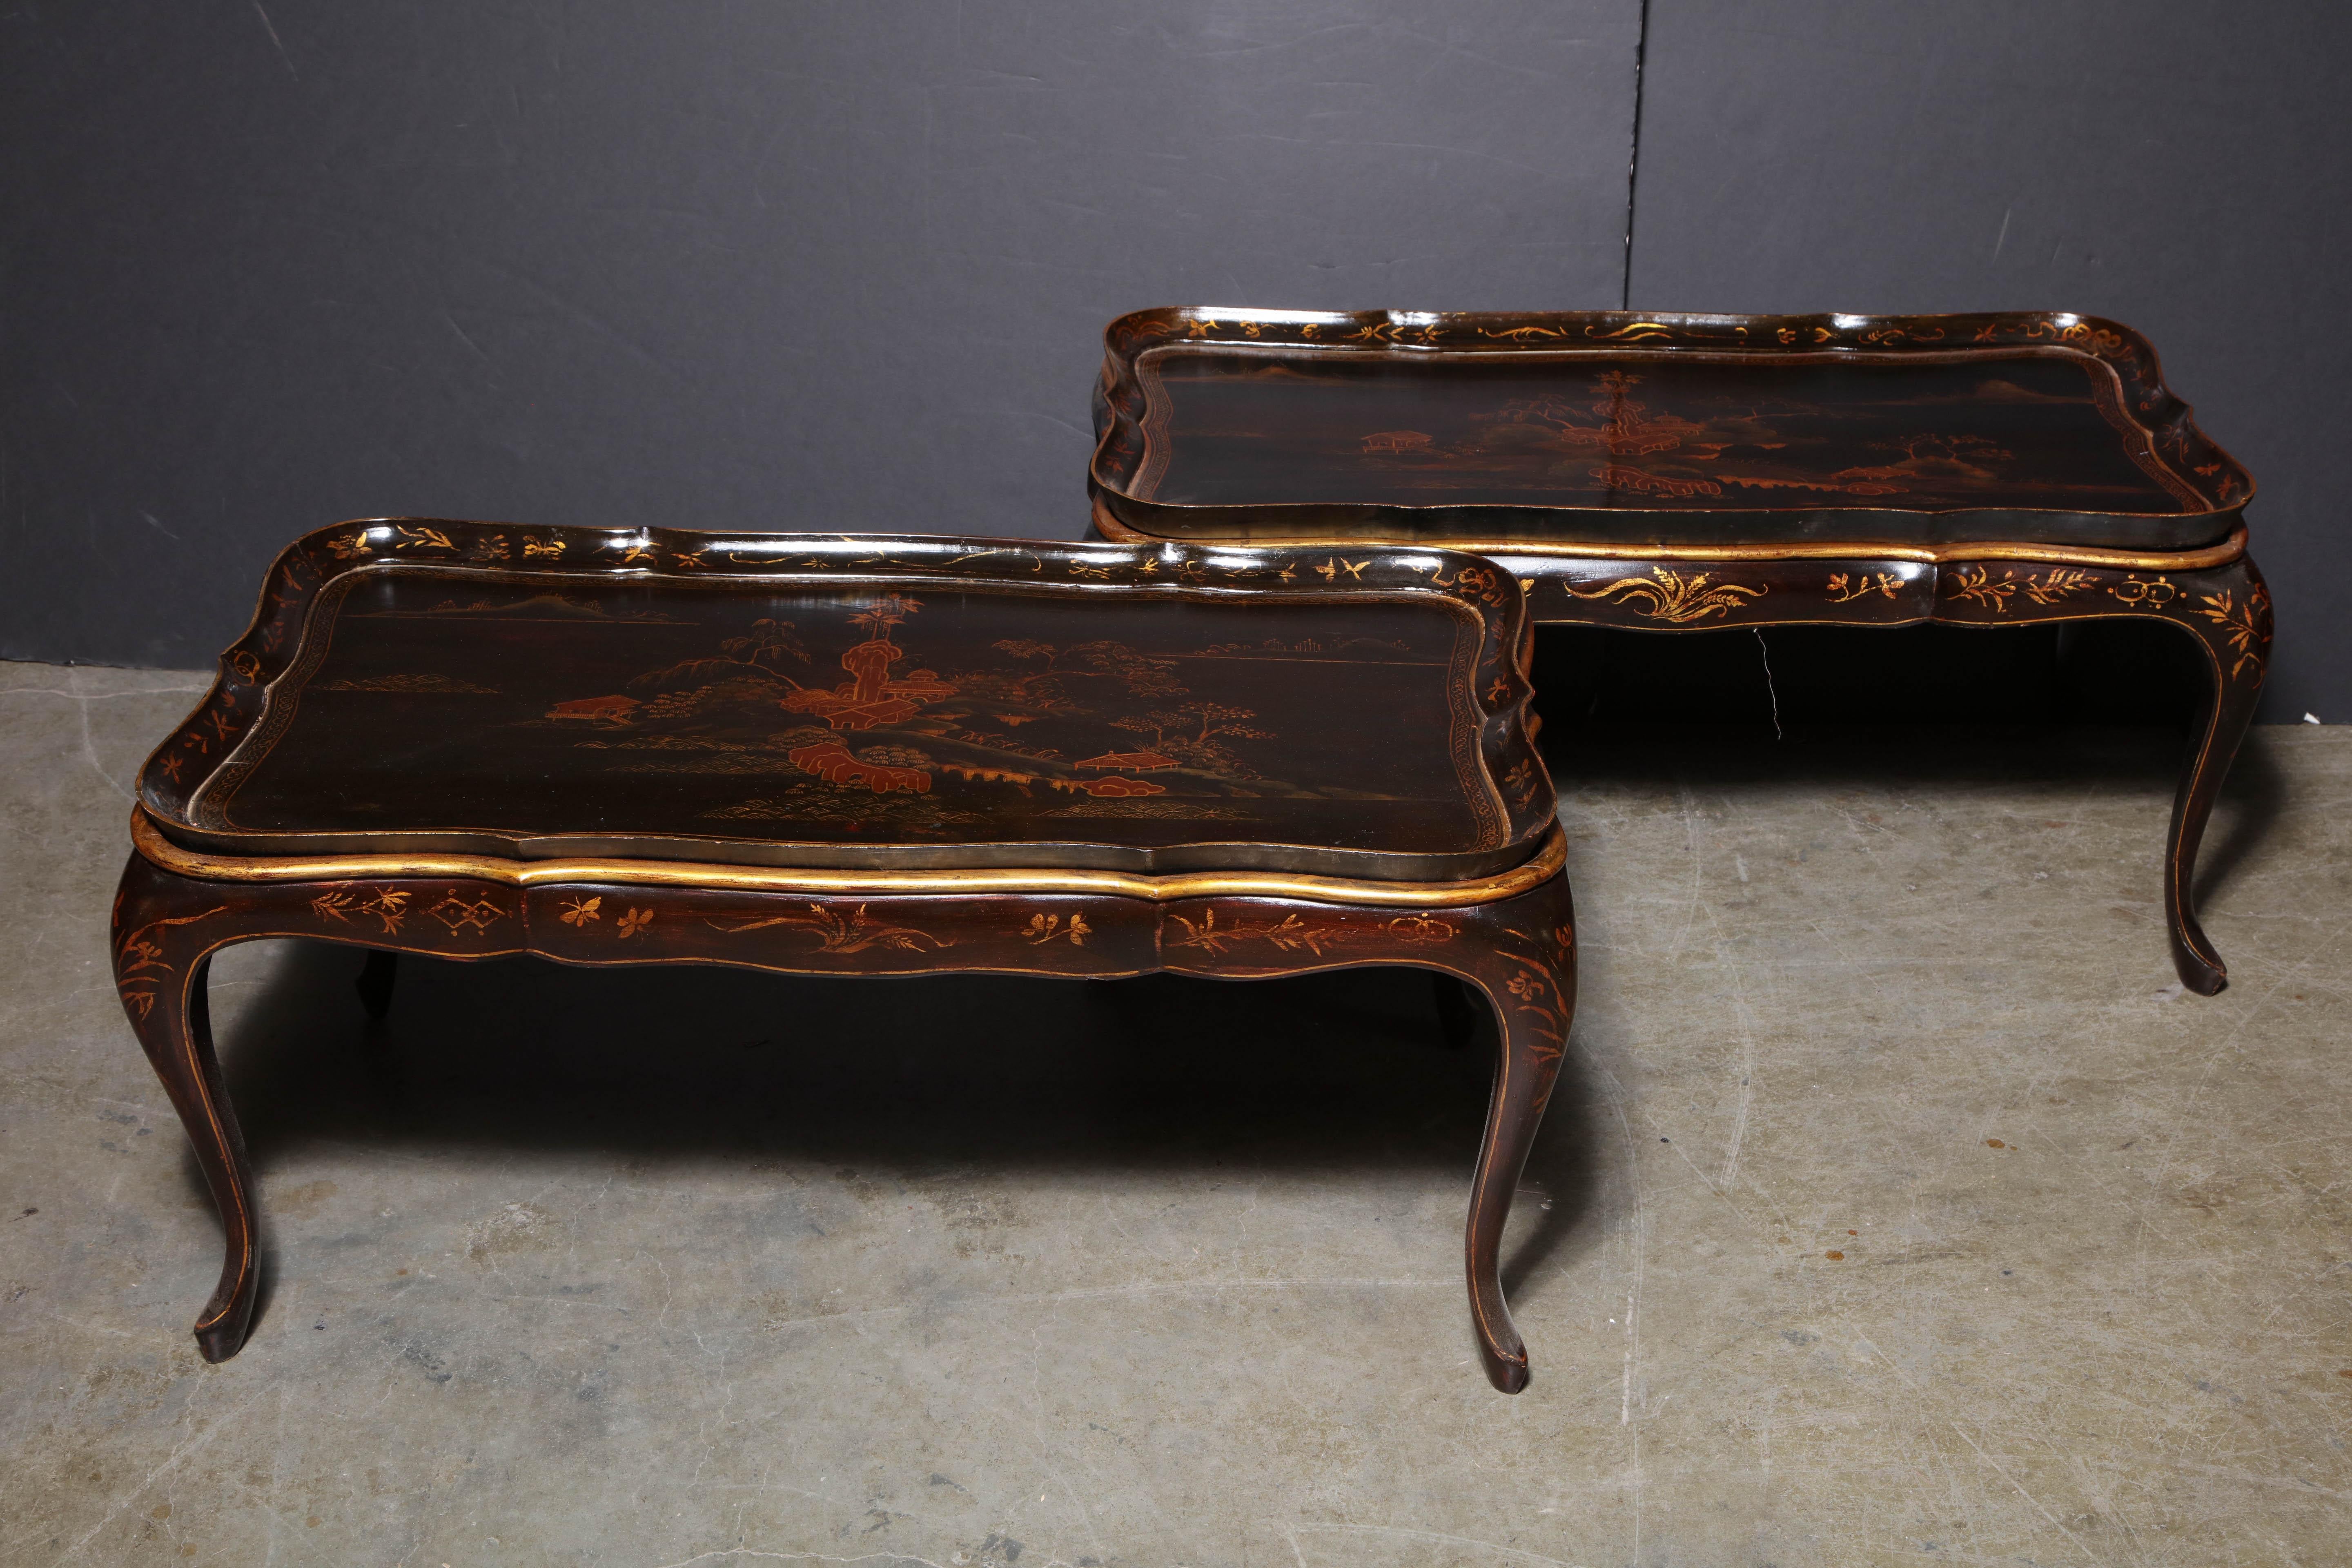 Two black lacquered Chinese low tables with serpentine (removable) tray tops on cabriole legs.